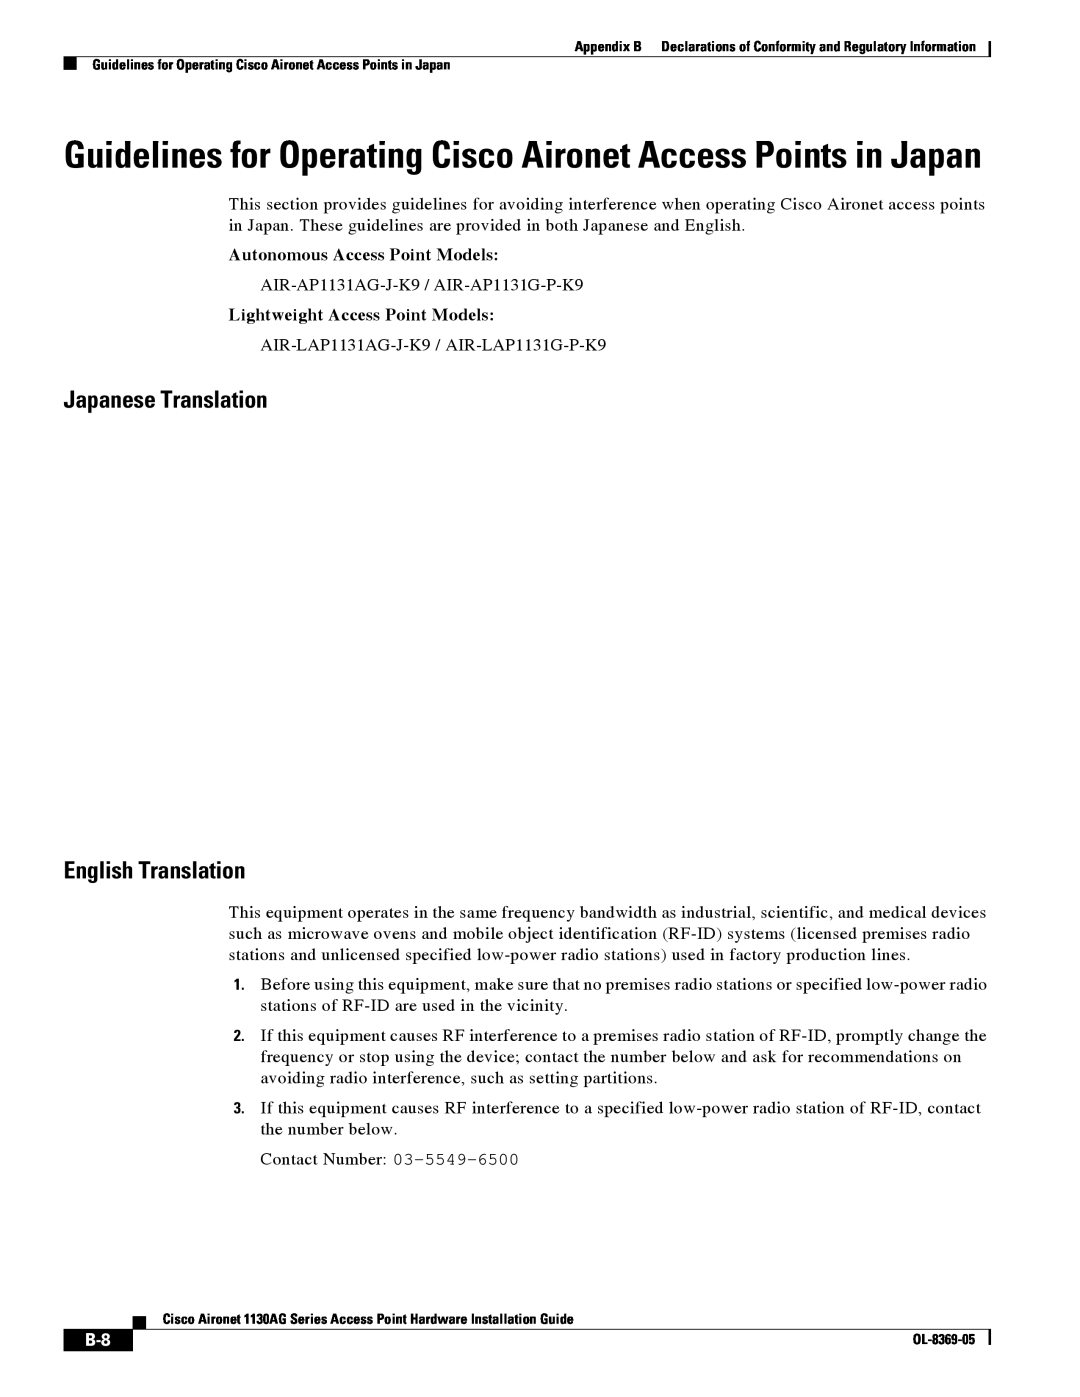 Cisco Systems 1130AG manual Guidelines for Operating Cisco Aironet Access Points in Japan, Autonomous Access Point Models 